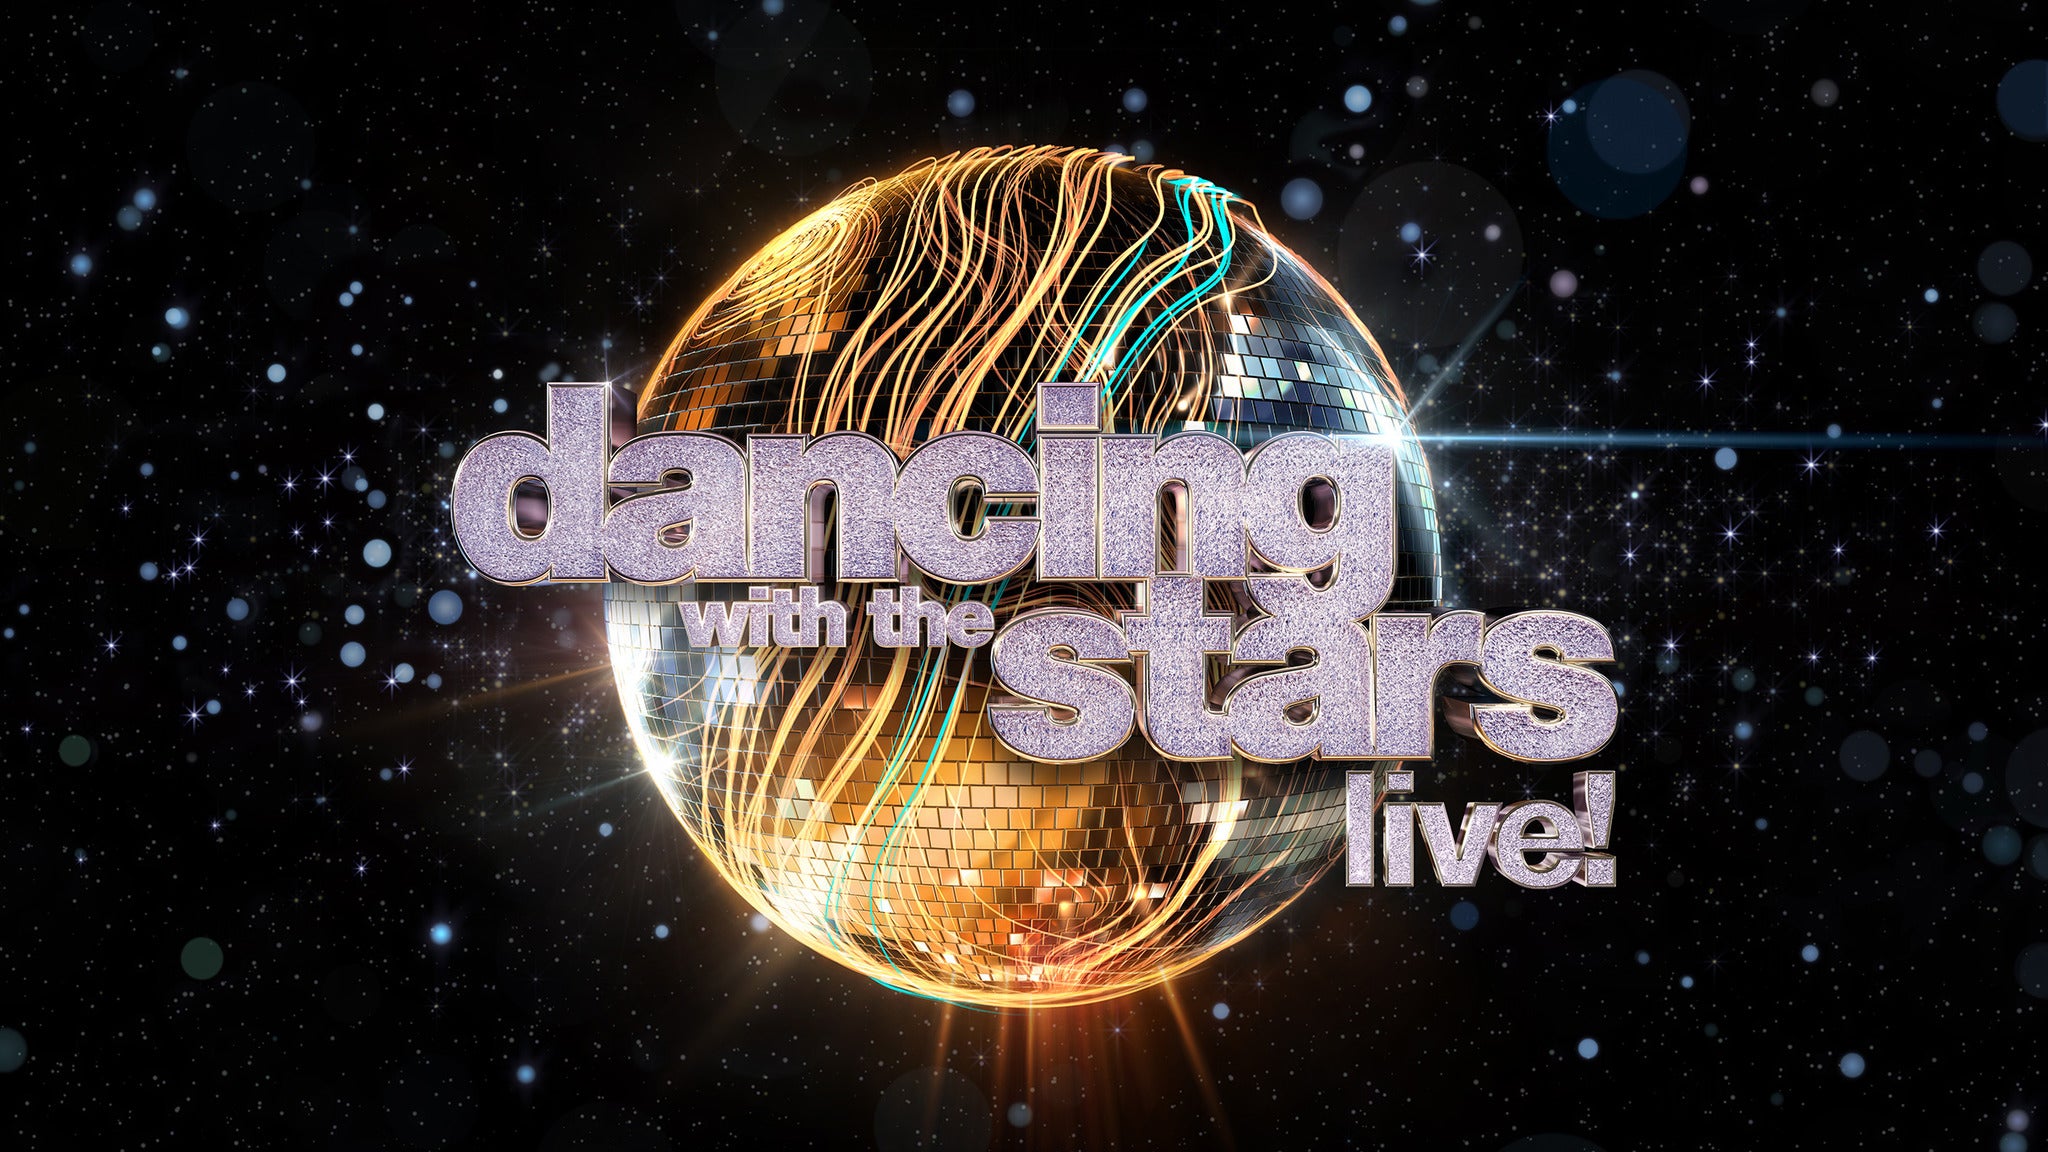 Dancing With The Stars: Live! - Light Up The Night in Windsor promo photo for Total Rewards presale offer code